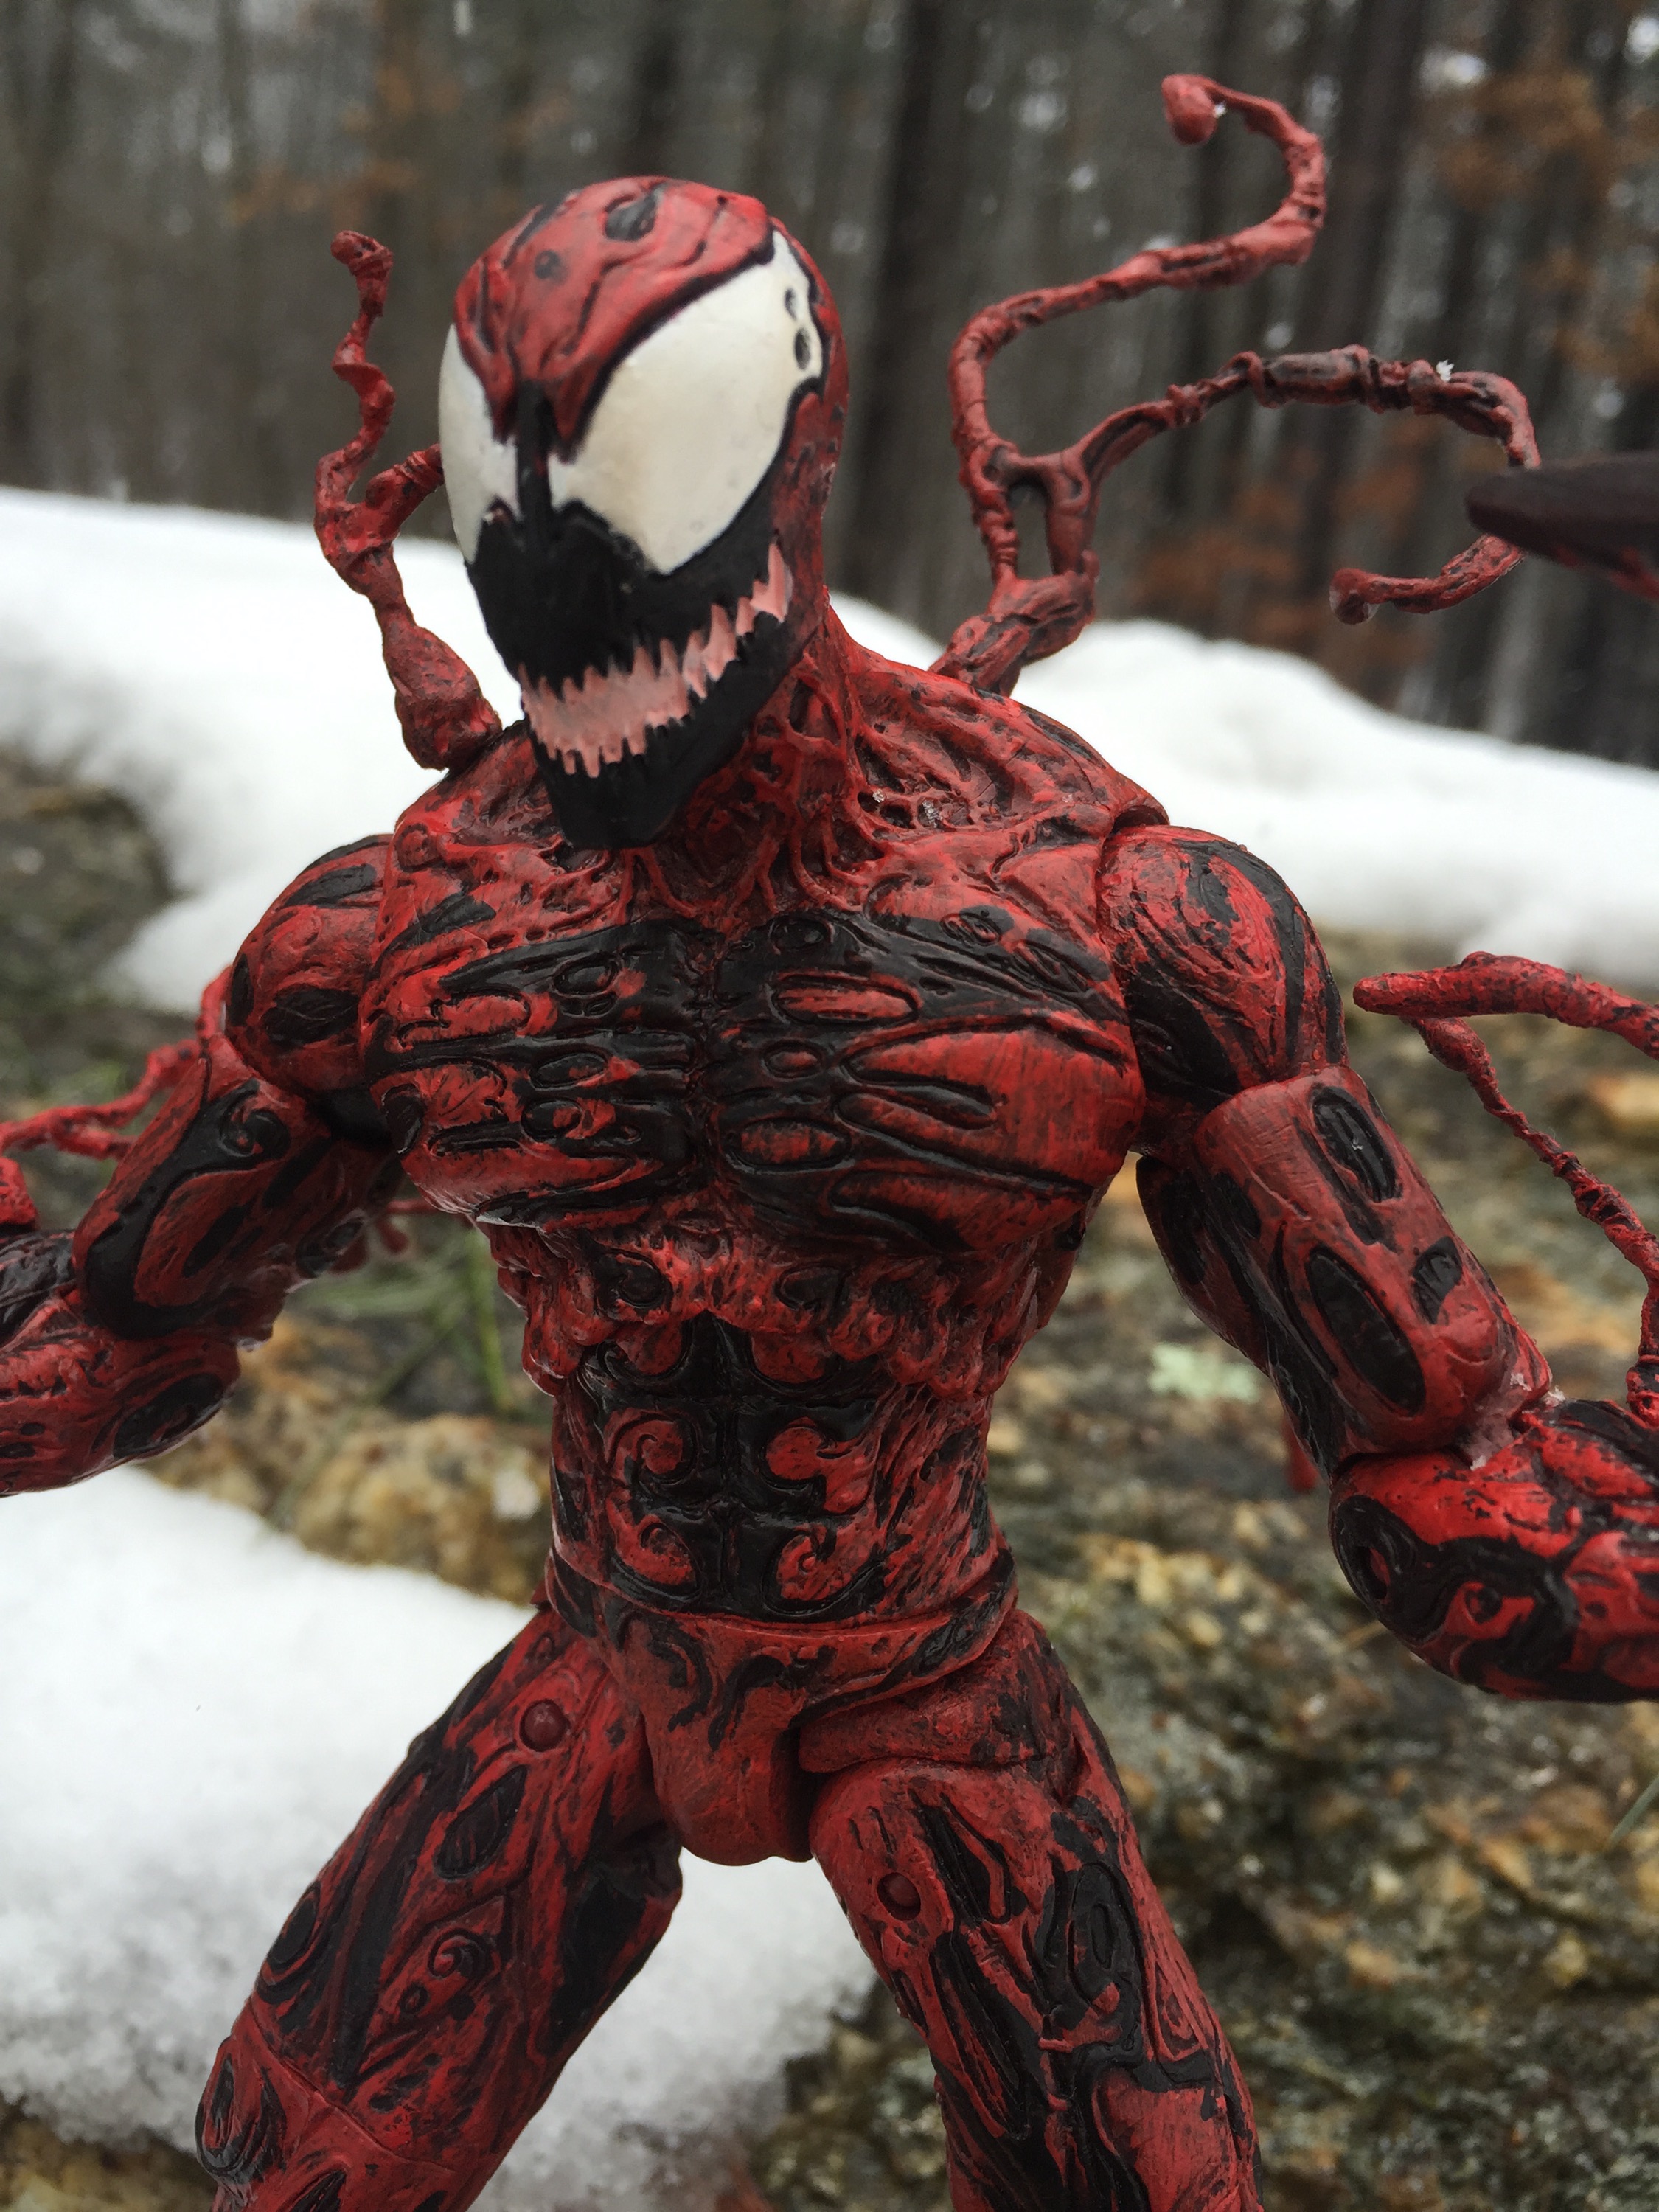 Marvel Select Carnage Reissue Up for PO! Review & Photos